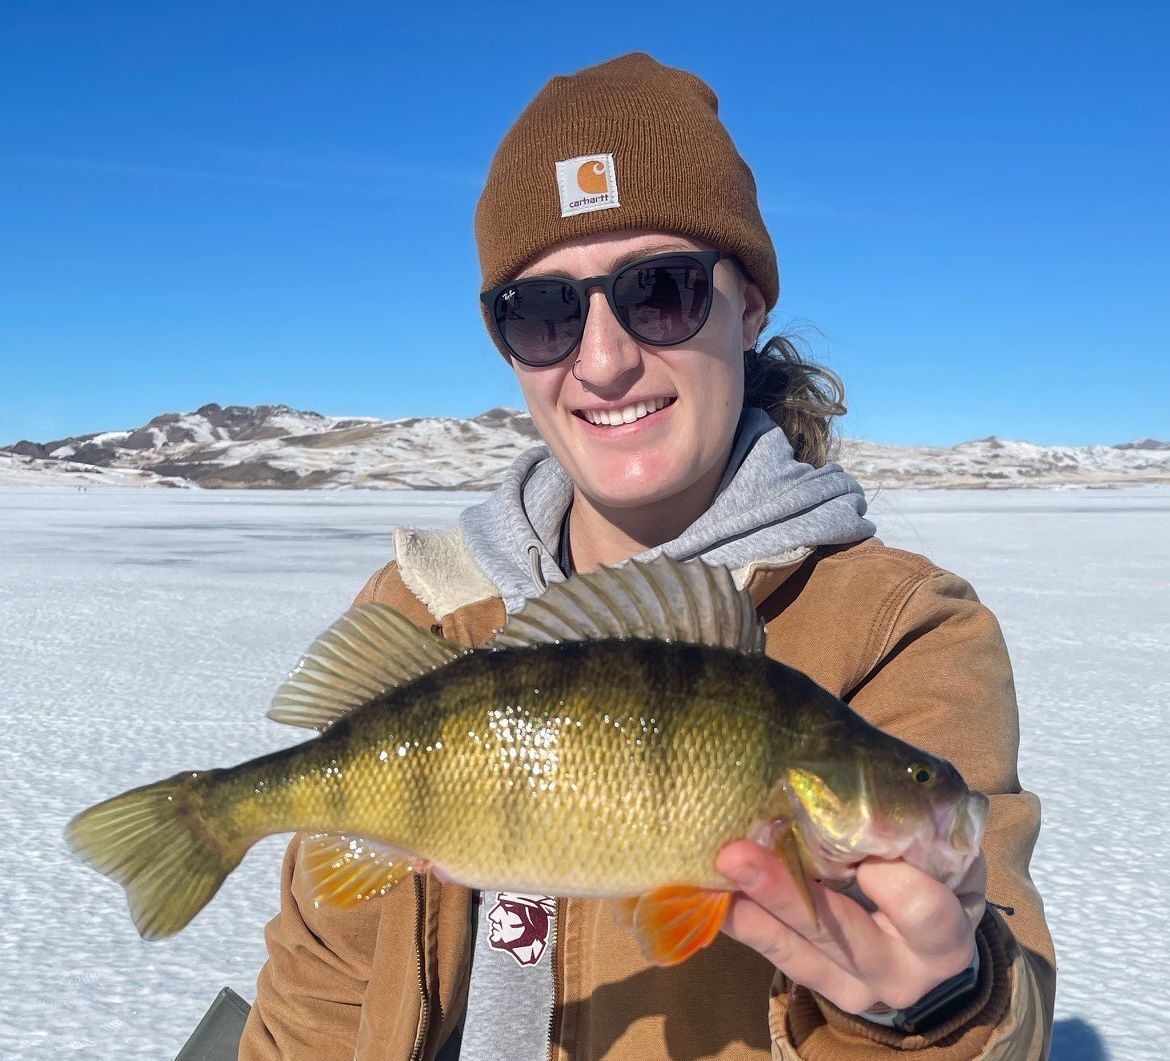 Joe's Fishing Hole: There's plenty of ice fishing out there, but be careful